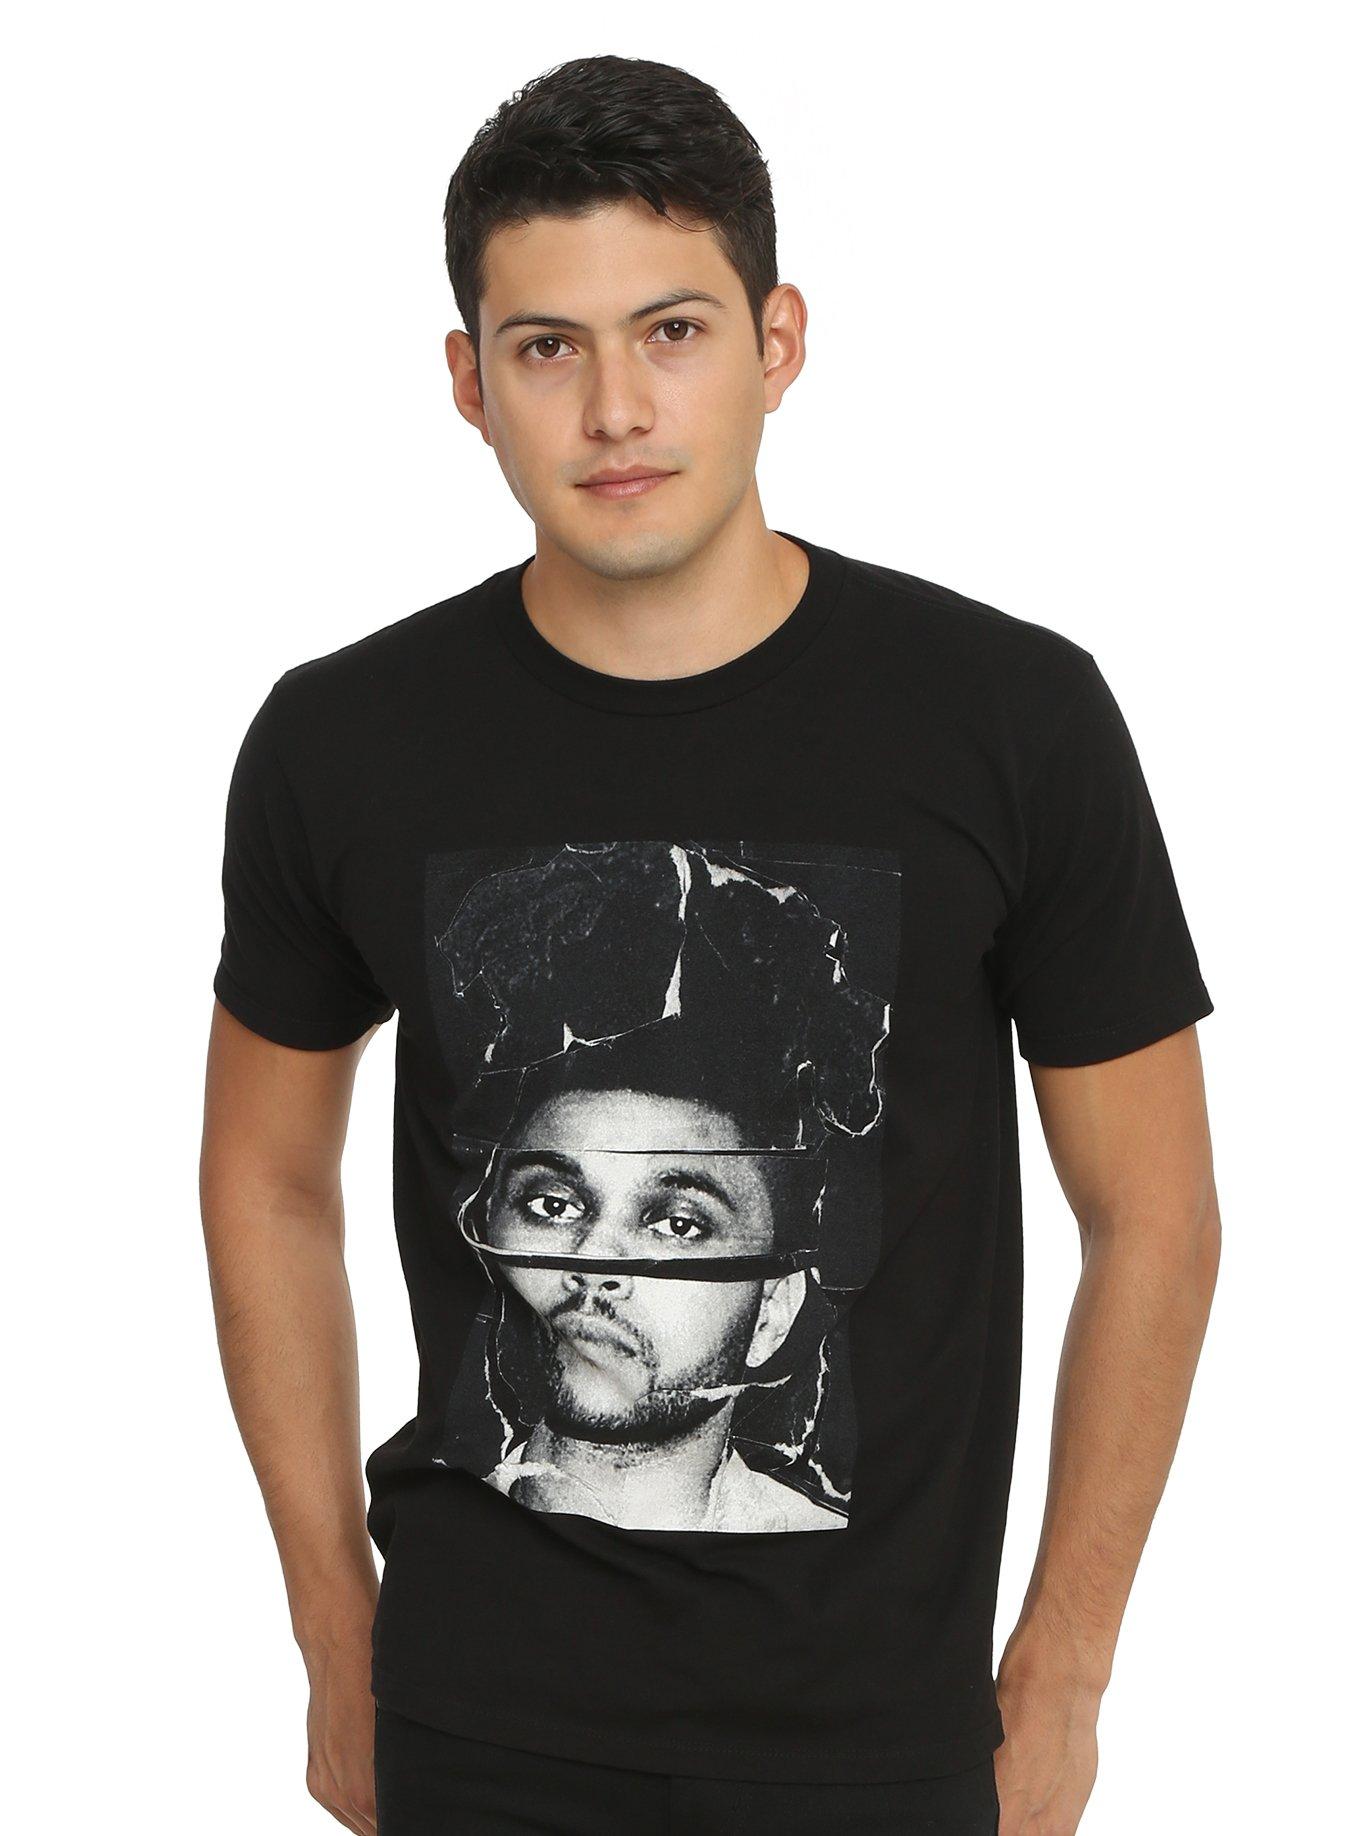 THE WEEKND Tshirt BEAUTY BEHIND THE MADNESS OVOXO Shirt M T-shirt size S to 4XL 